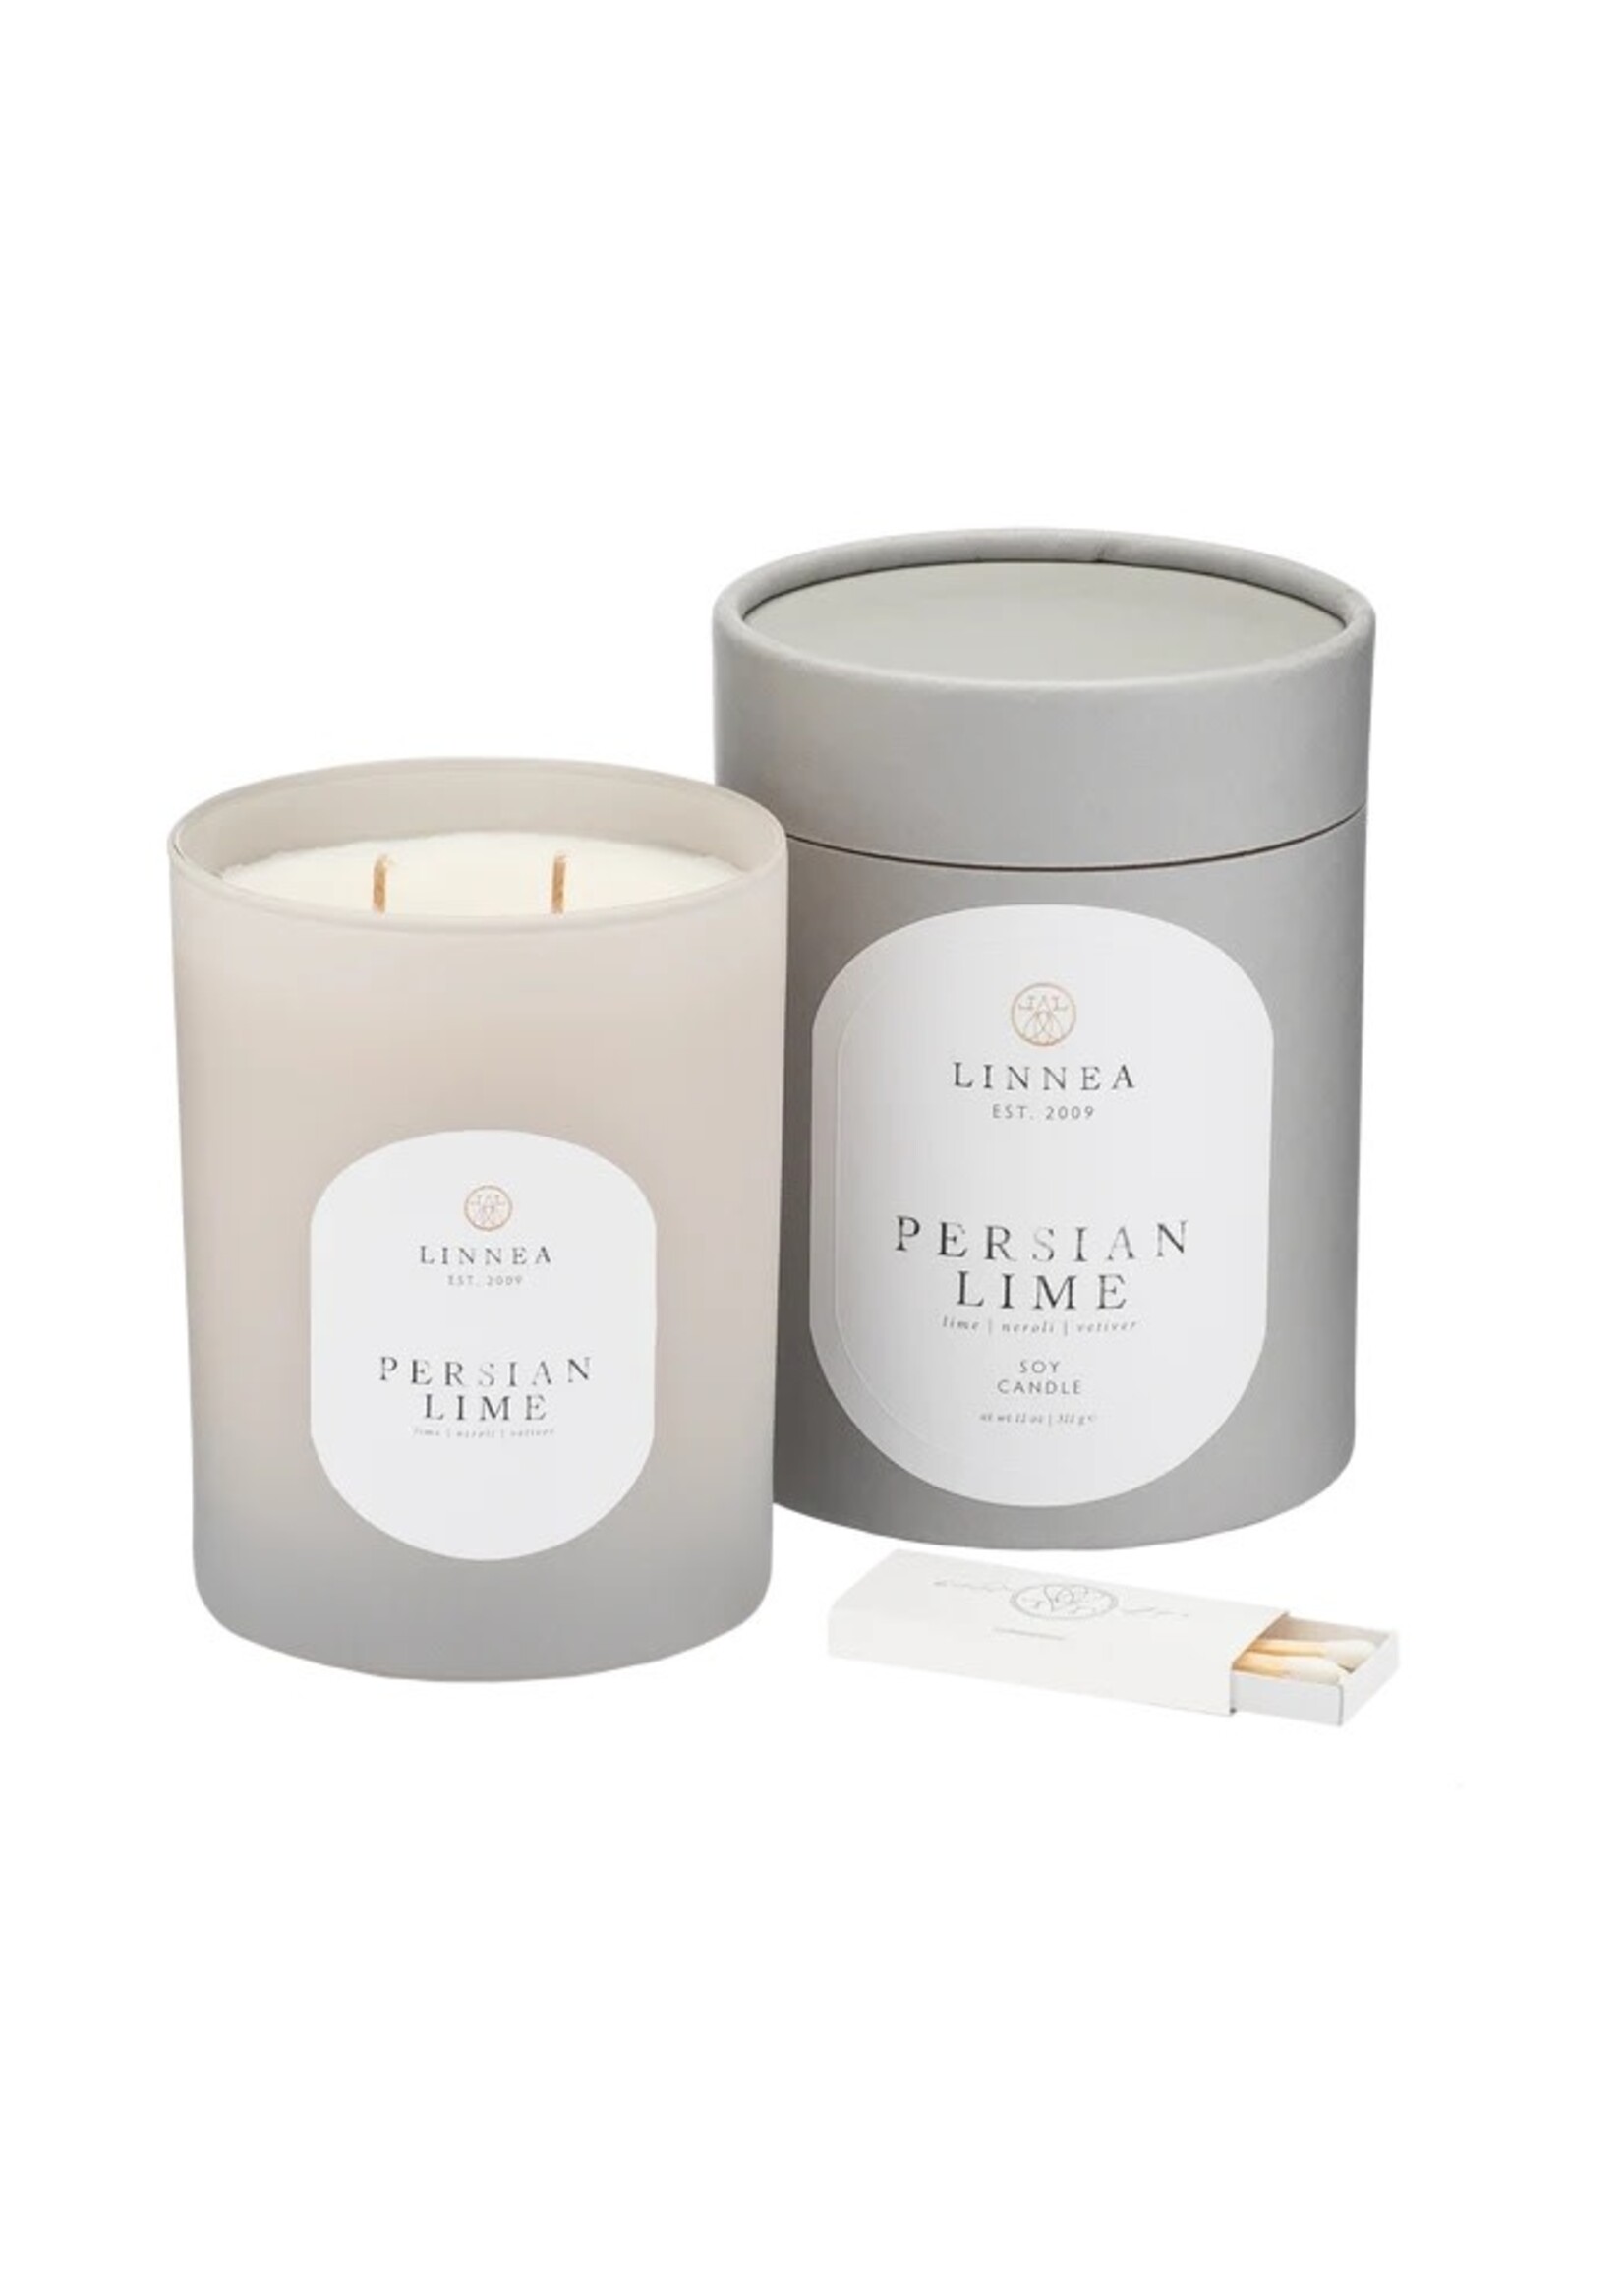 Linnea & Co. Candle - Persian Lime 2-wick